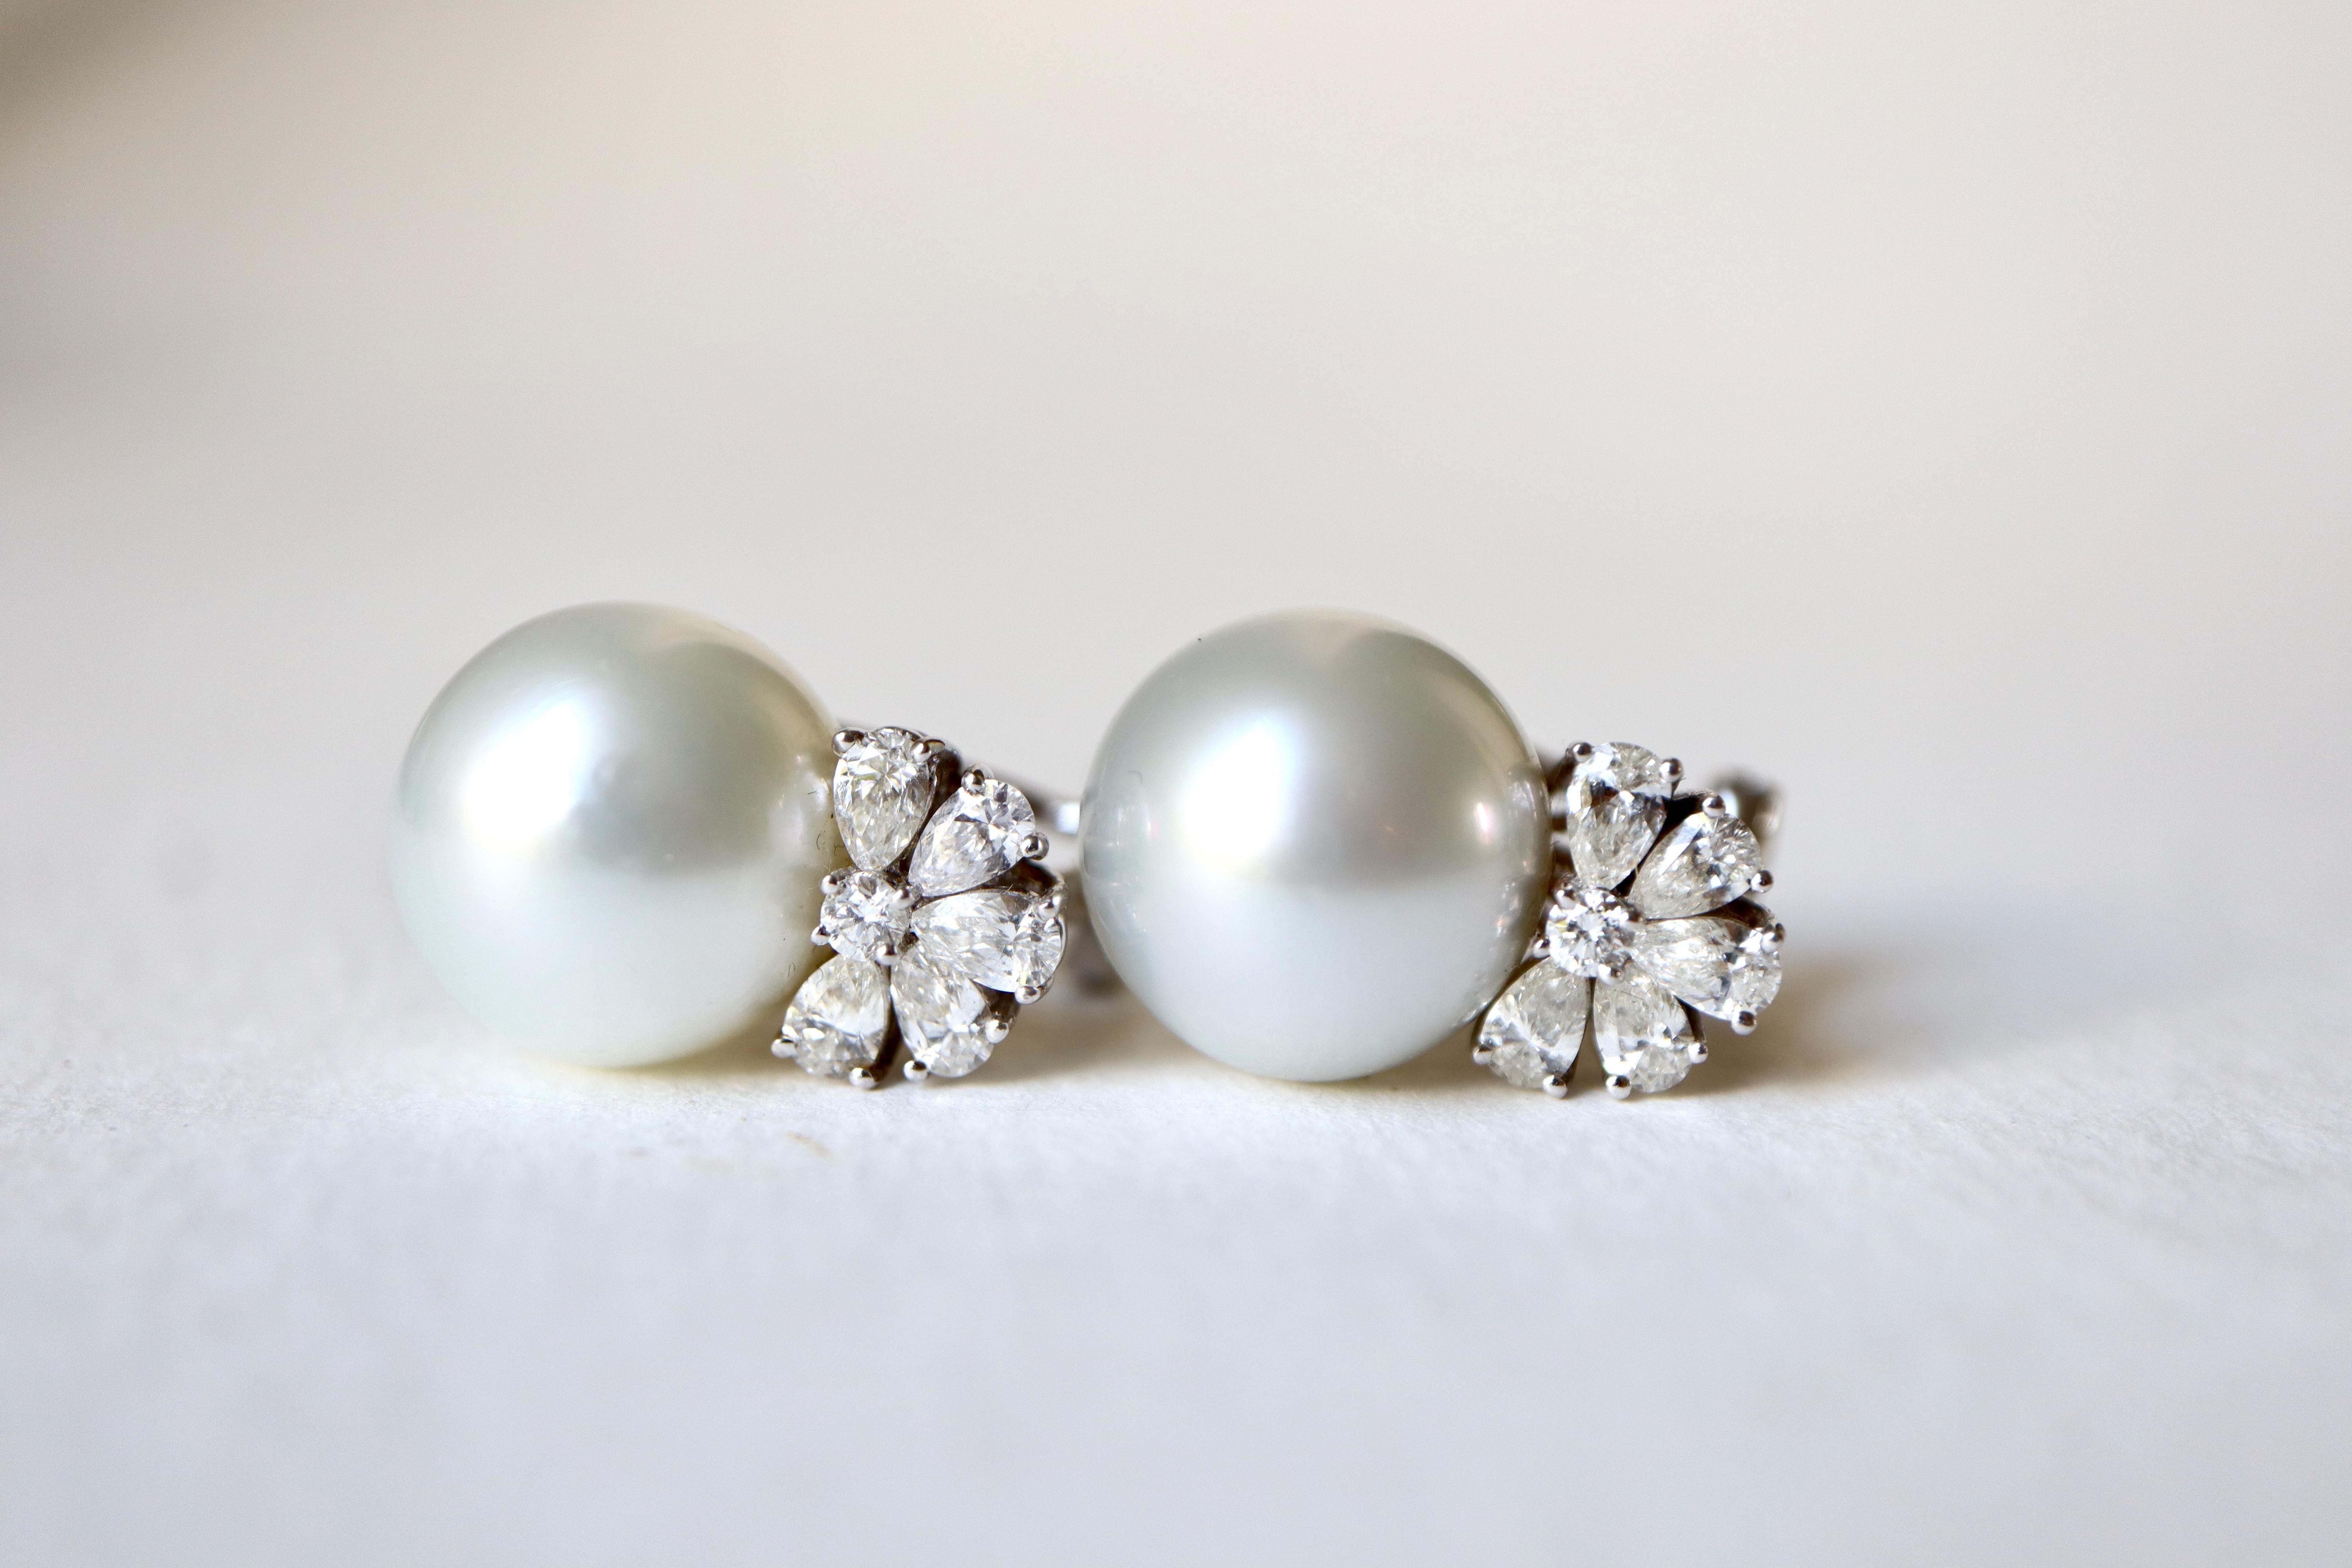 Romantic Pearl Clip Earrings 18 Carat White Gold Set with 1.4 Carat of Diamonds